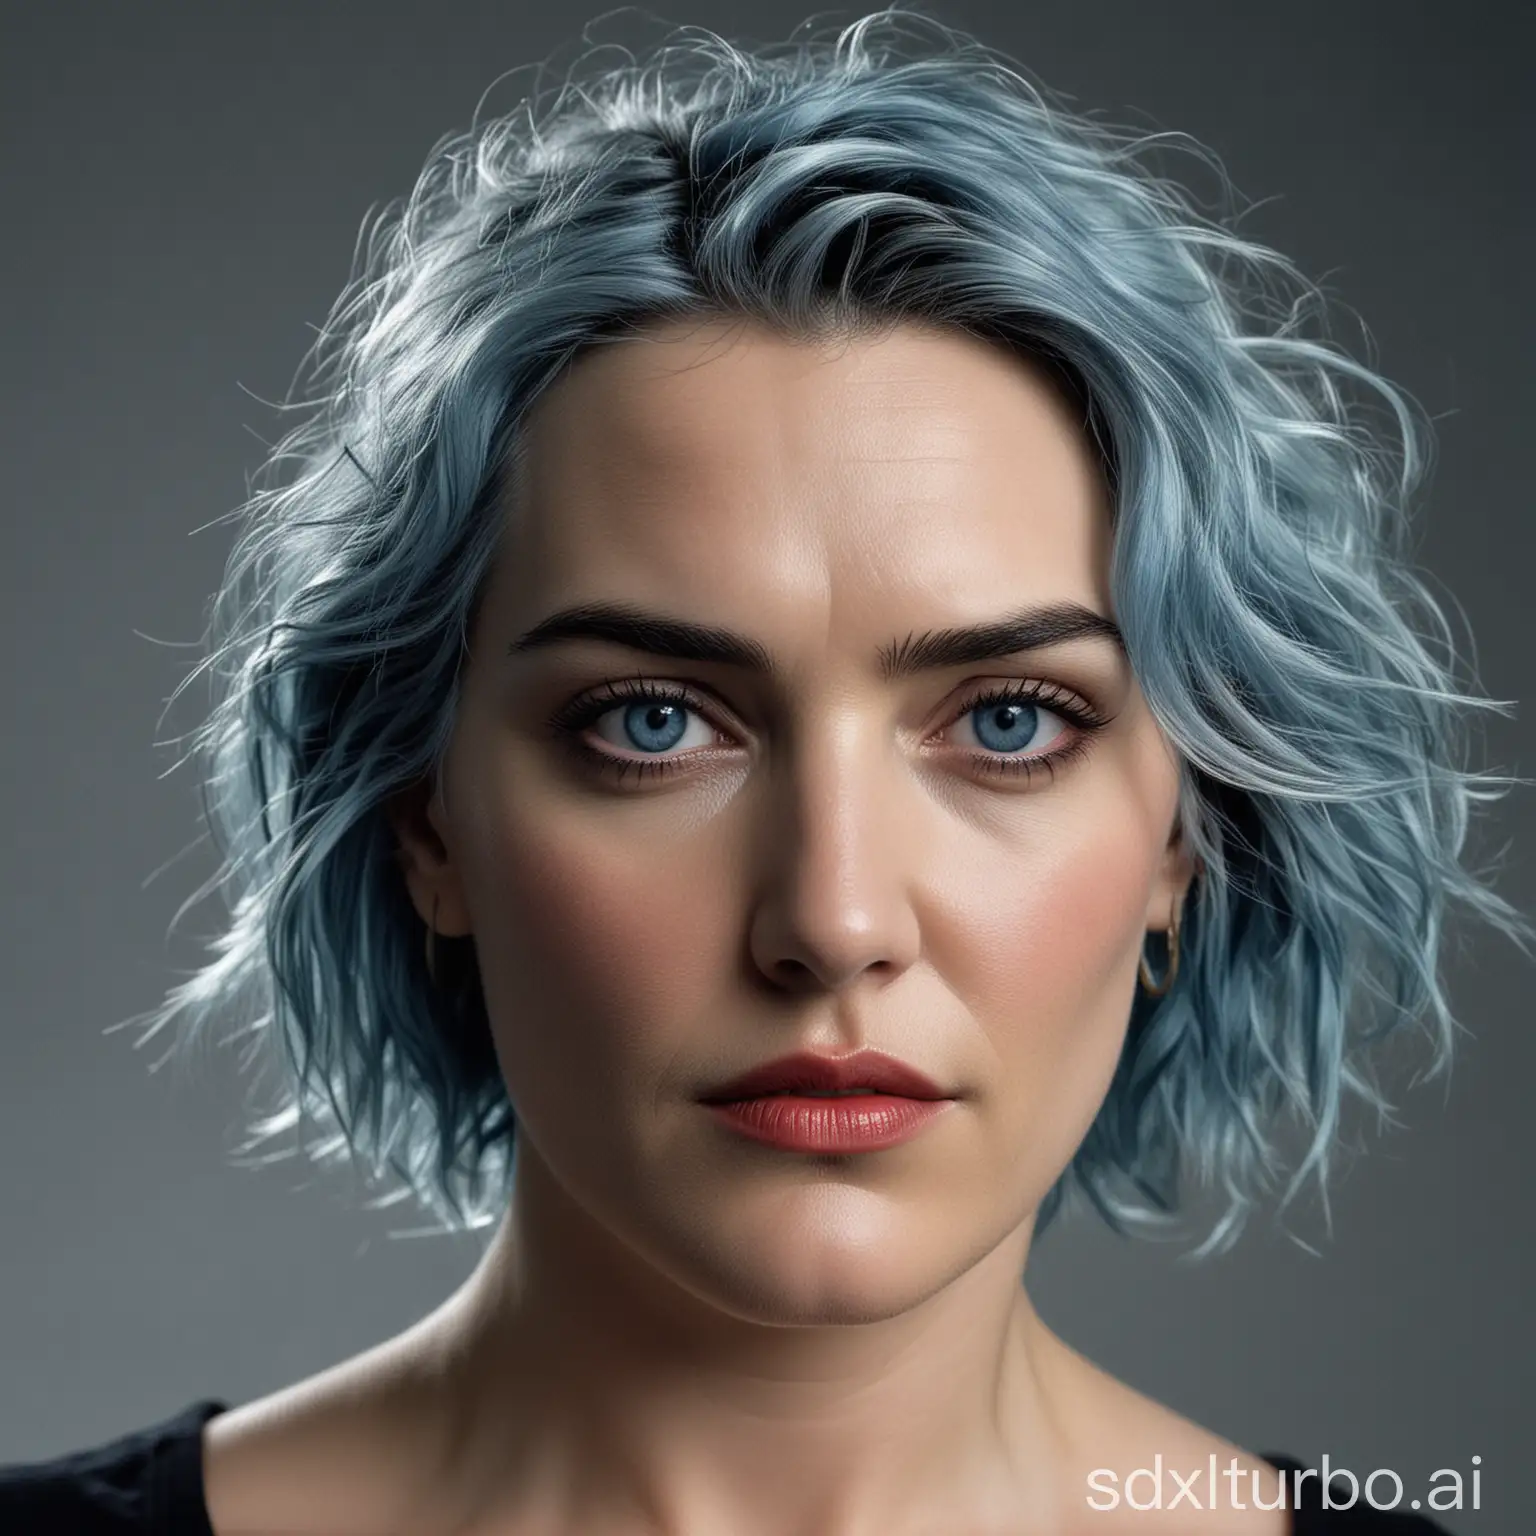 Portrait-of-Kate-Winslet-with-Red-Eyes-and-Blue-Hair